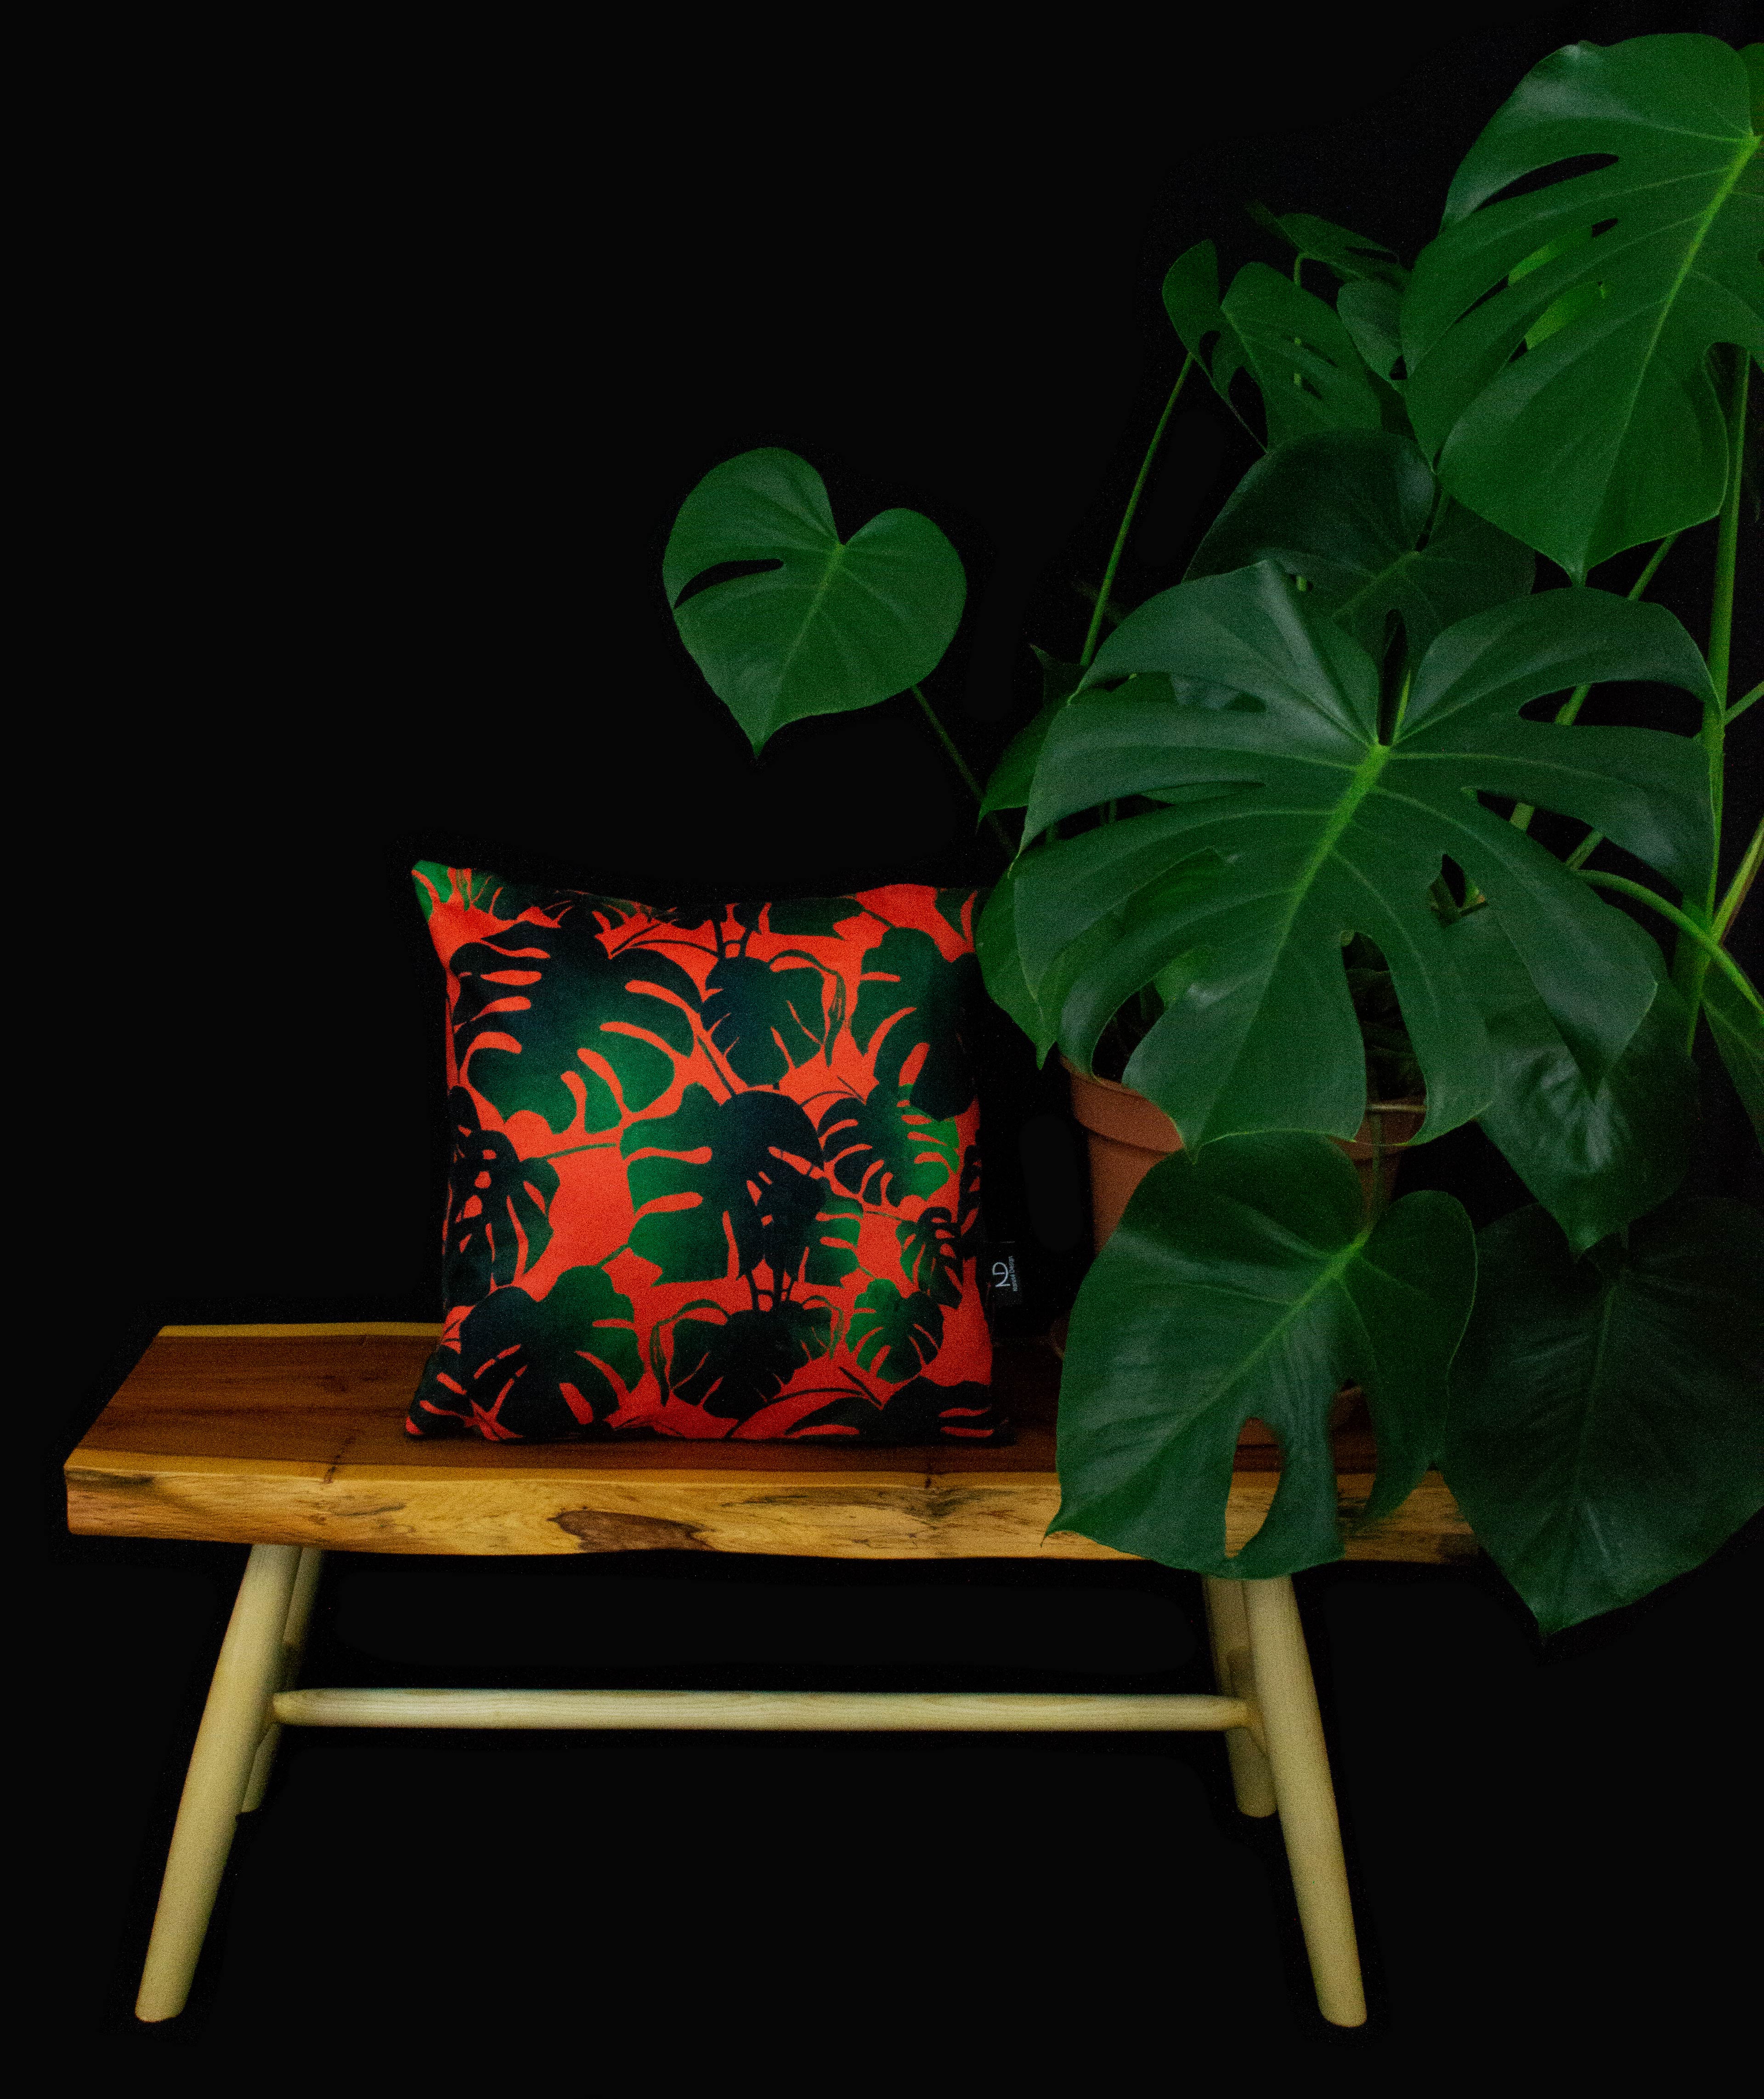 Cheese plant cushion with green printed leaves ontop of a orange backgroun displayed ontop of wooden table.